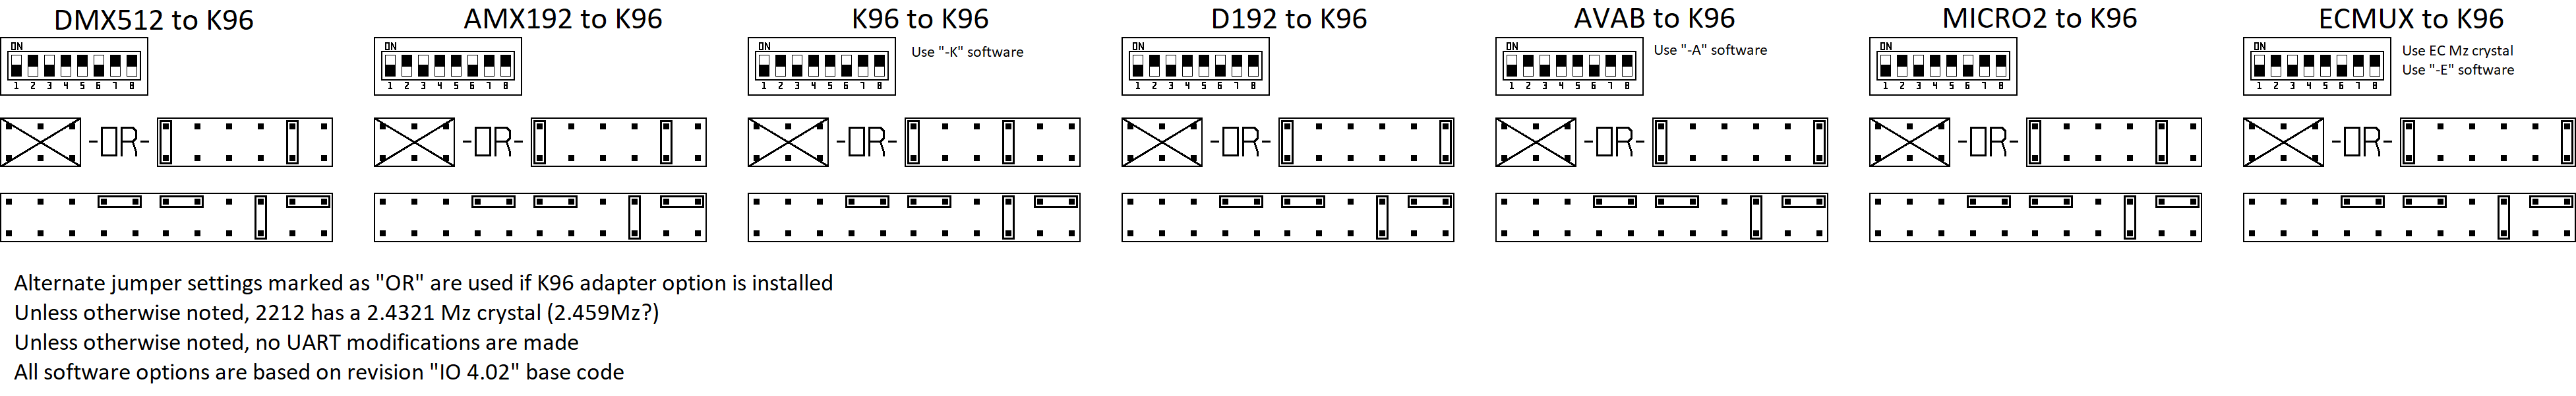 RD2031 Input to K96.png